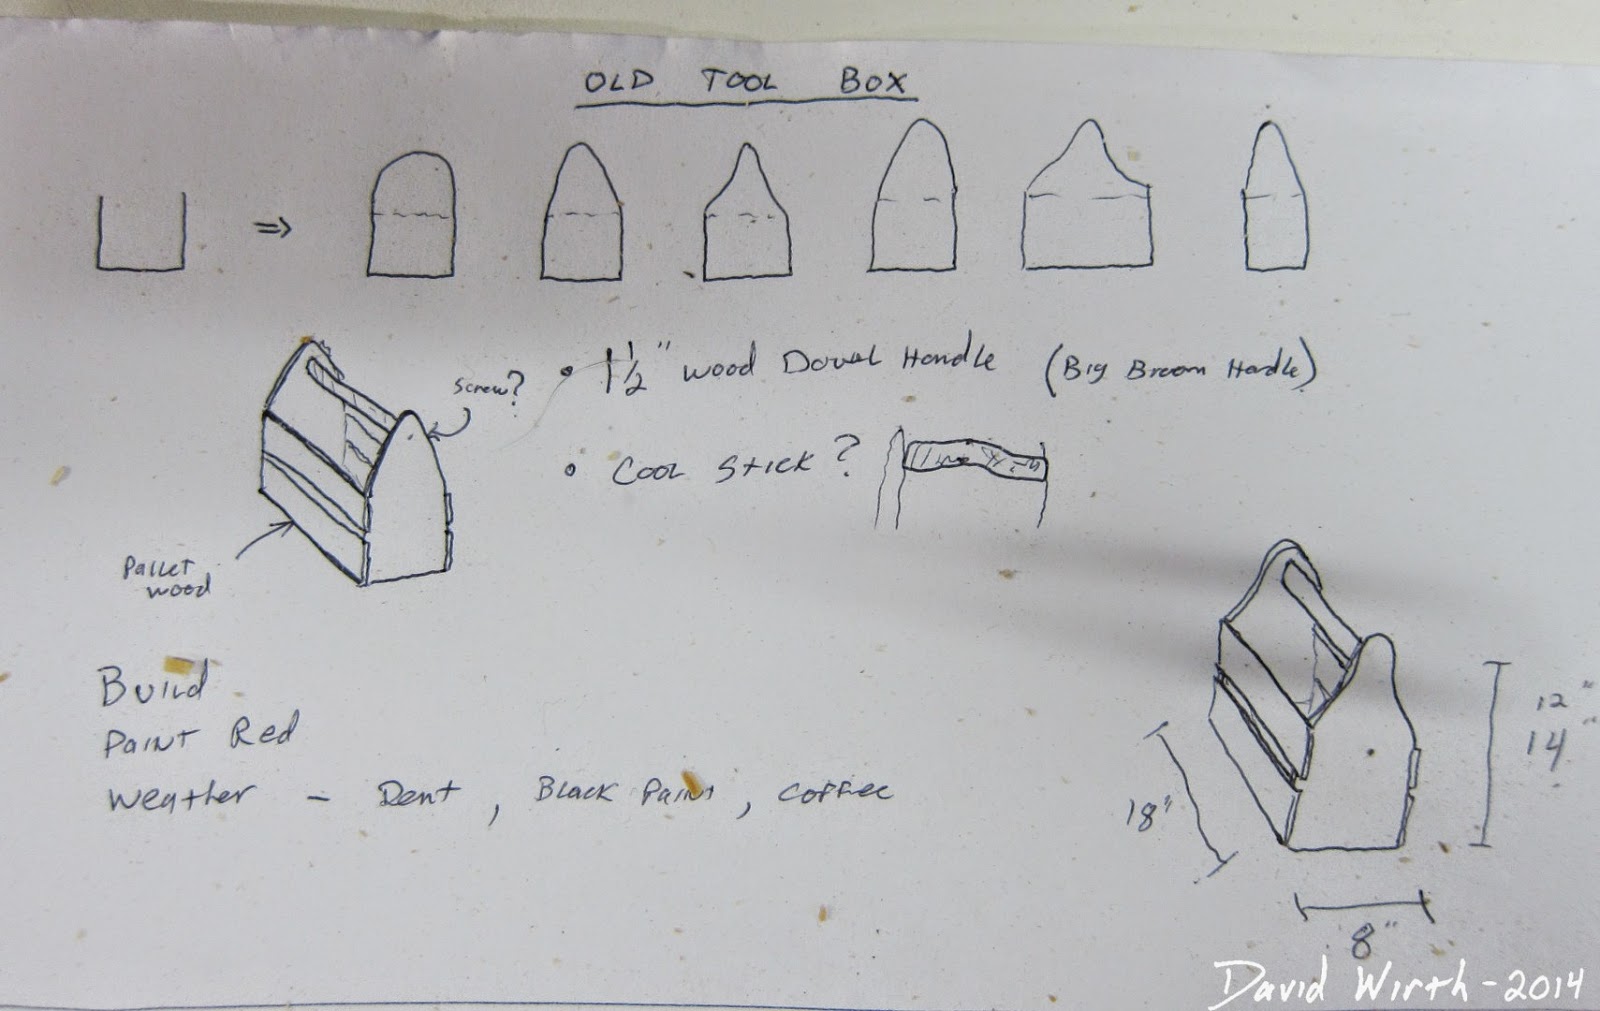  explain and show pretty much every step in building the wood tool box